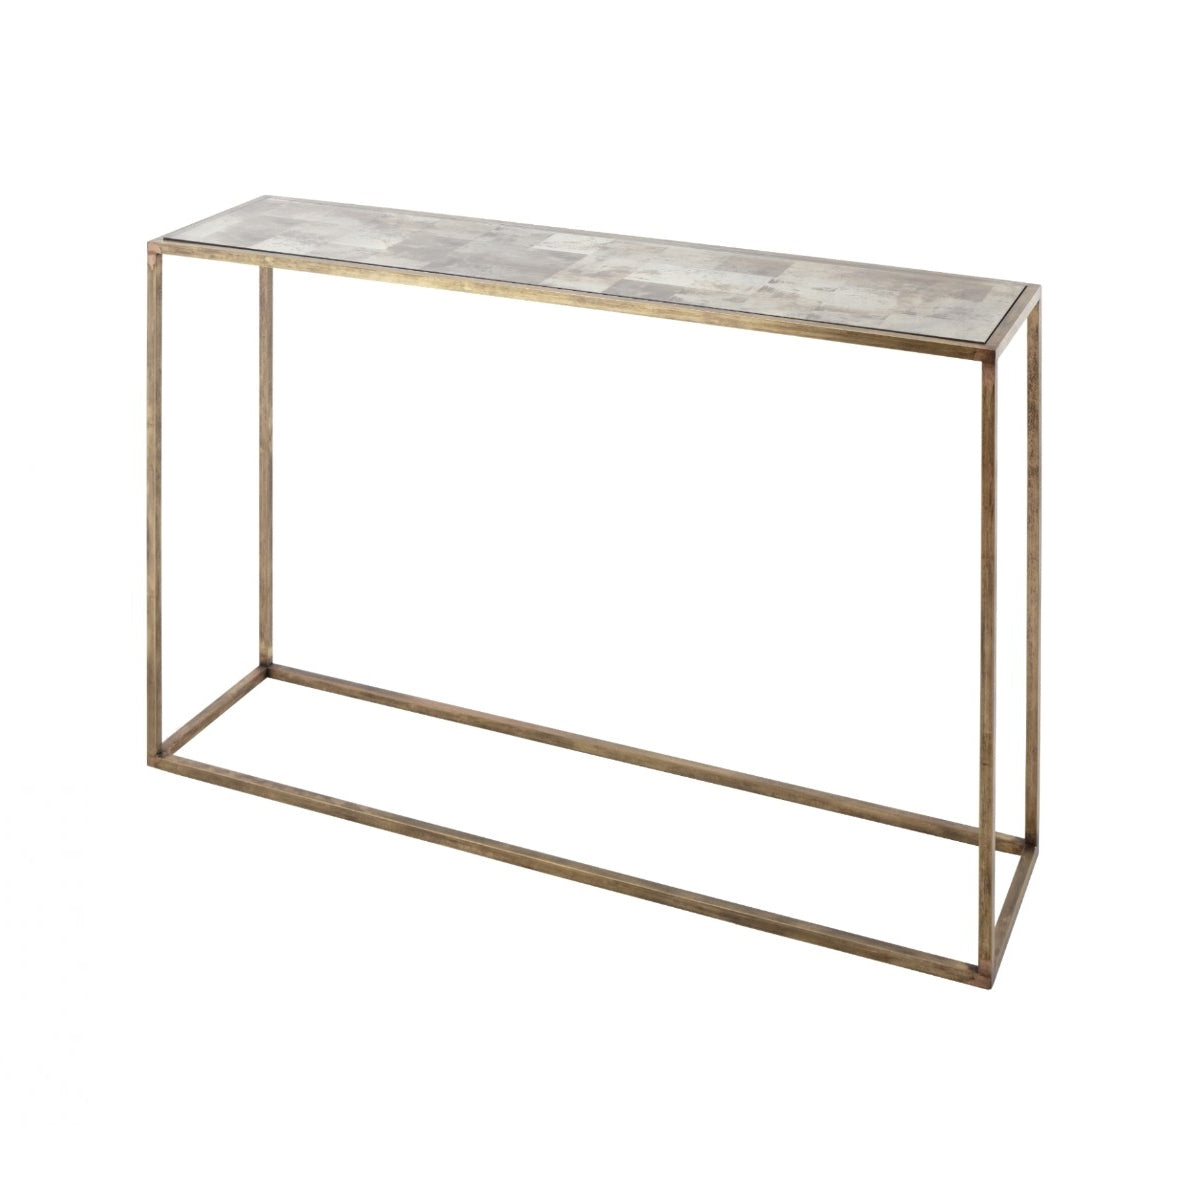 RV Astley Amadeo Console Table